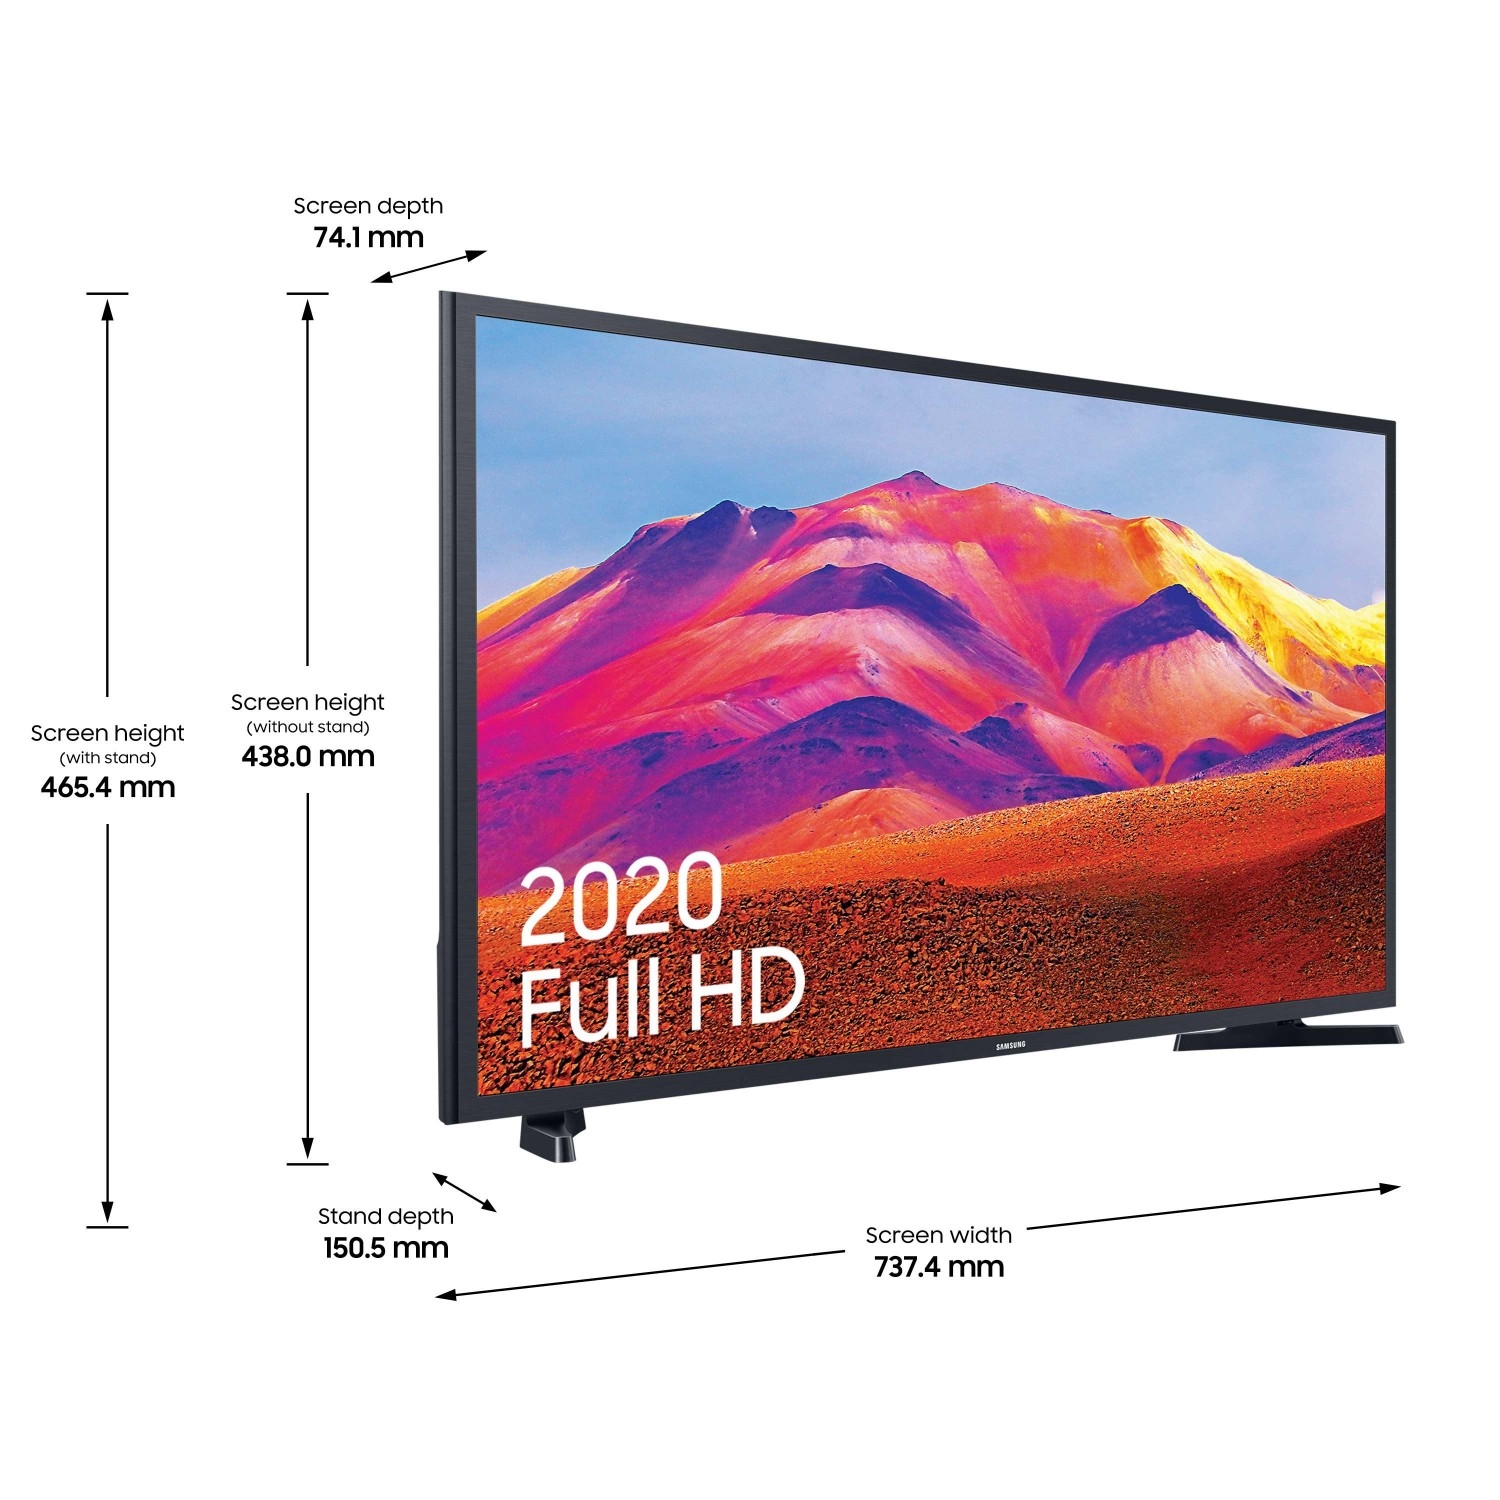 Samsung UE32T5300CKXXU 32" Full HD HDR Smart TV with PurColour and Contrast Enhancer - 6